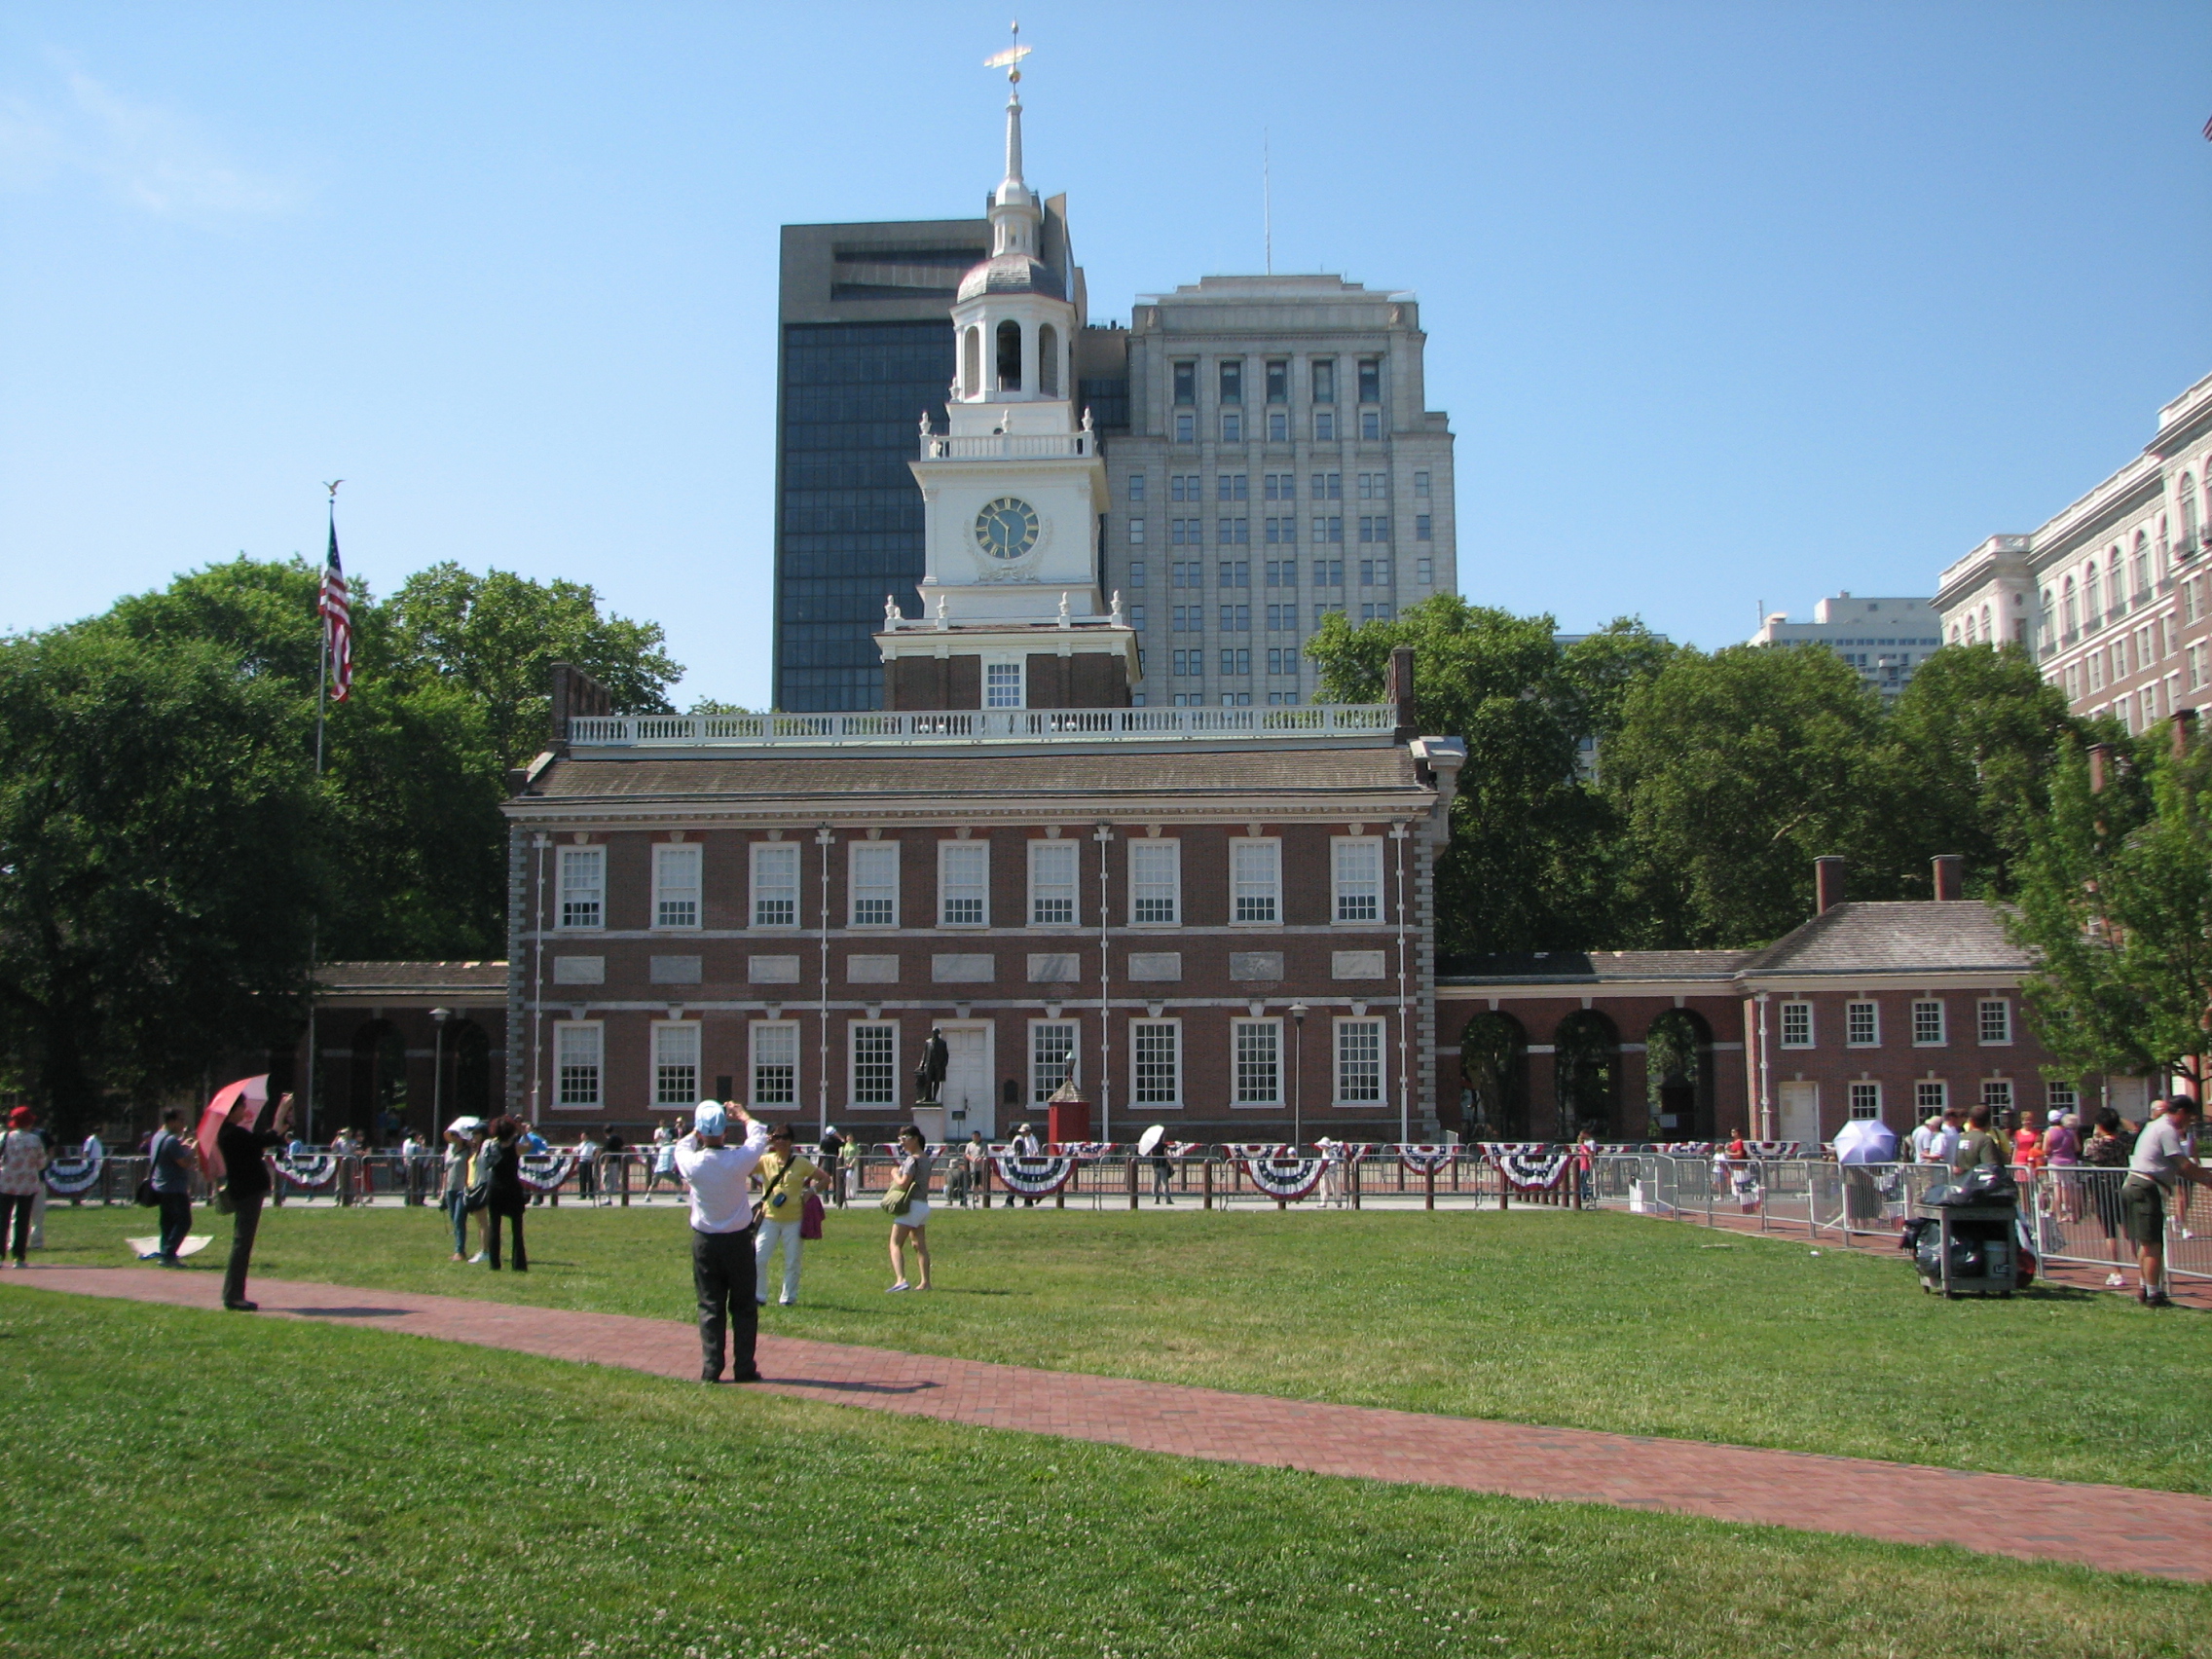 The focal point of Independence Mall is the former State House, where the founders debated the price of freedom.